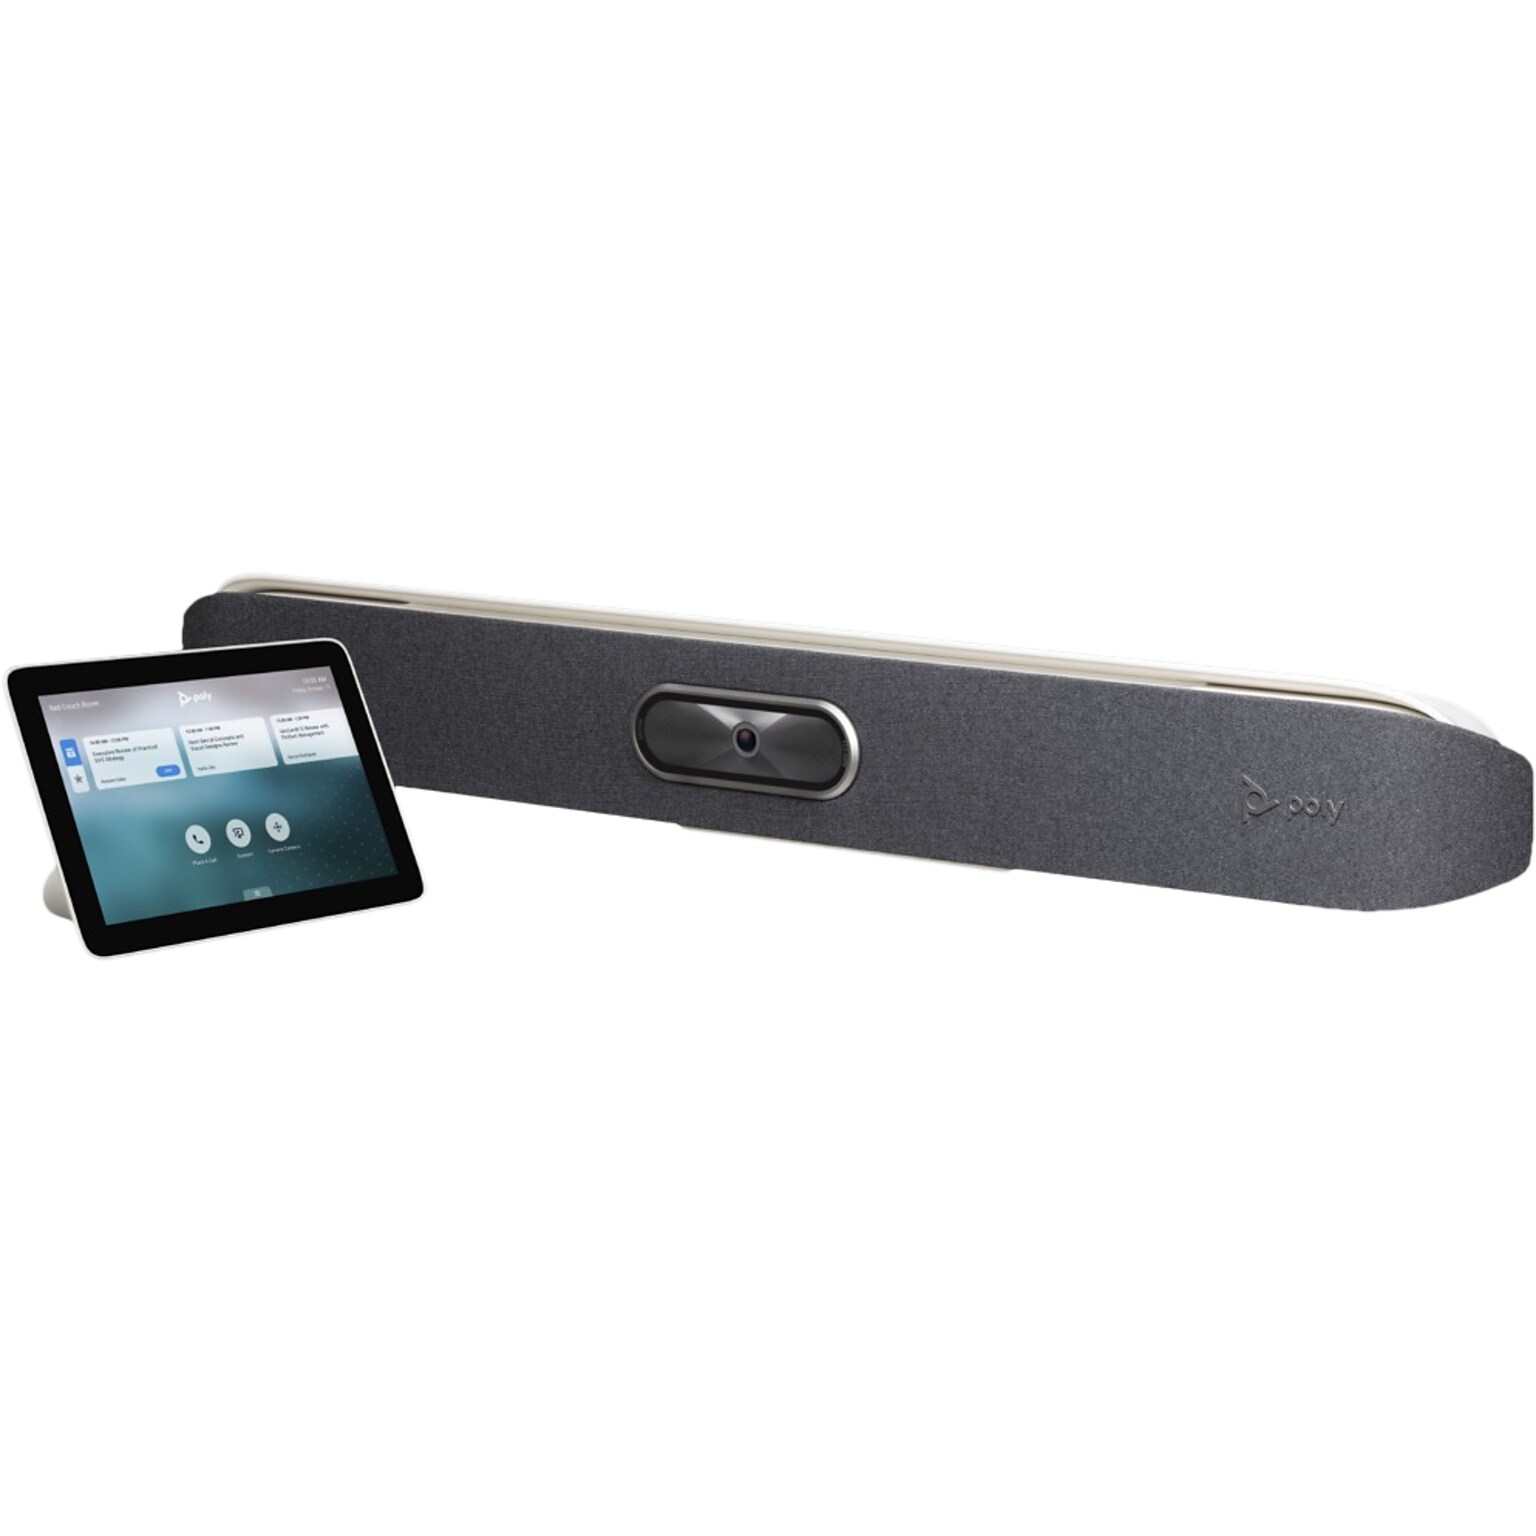 Poly Studio X50 UHD Conferencing Video Bar with T8 Touch Interface, 8 Megapixels, Black (2200-86270-001)